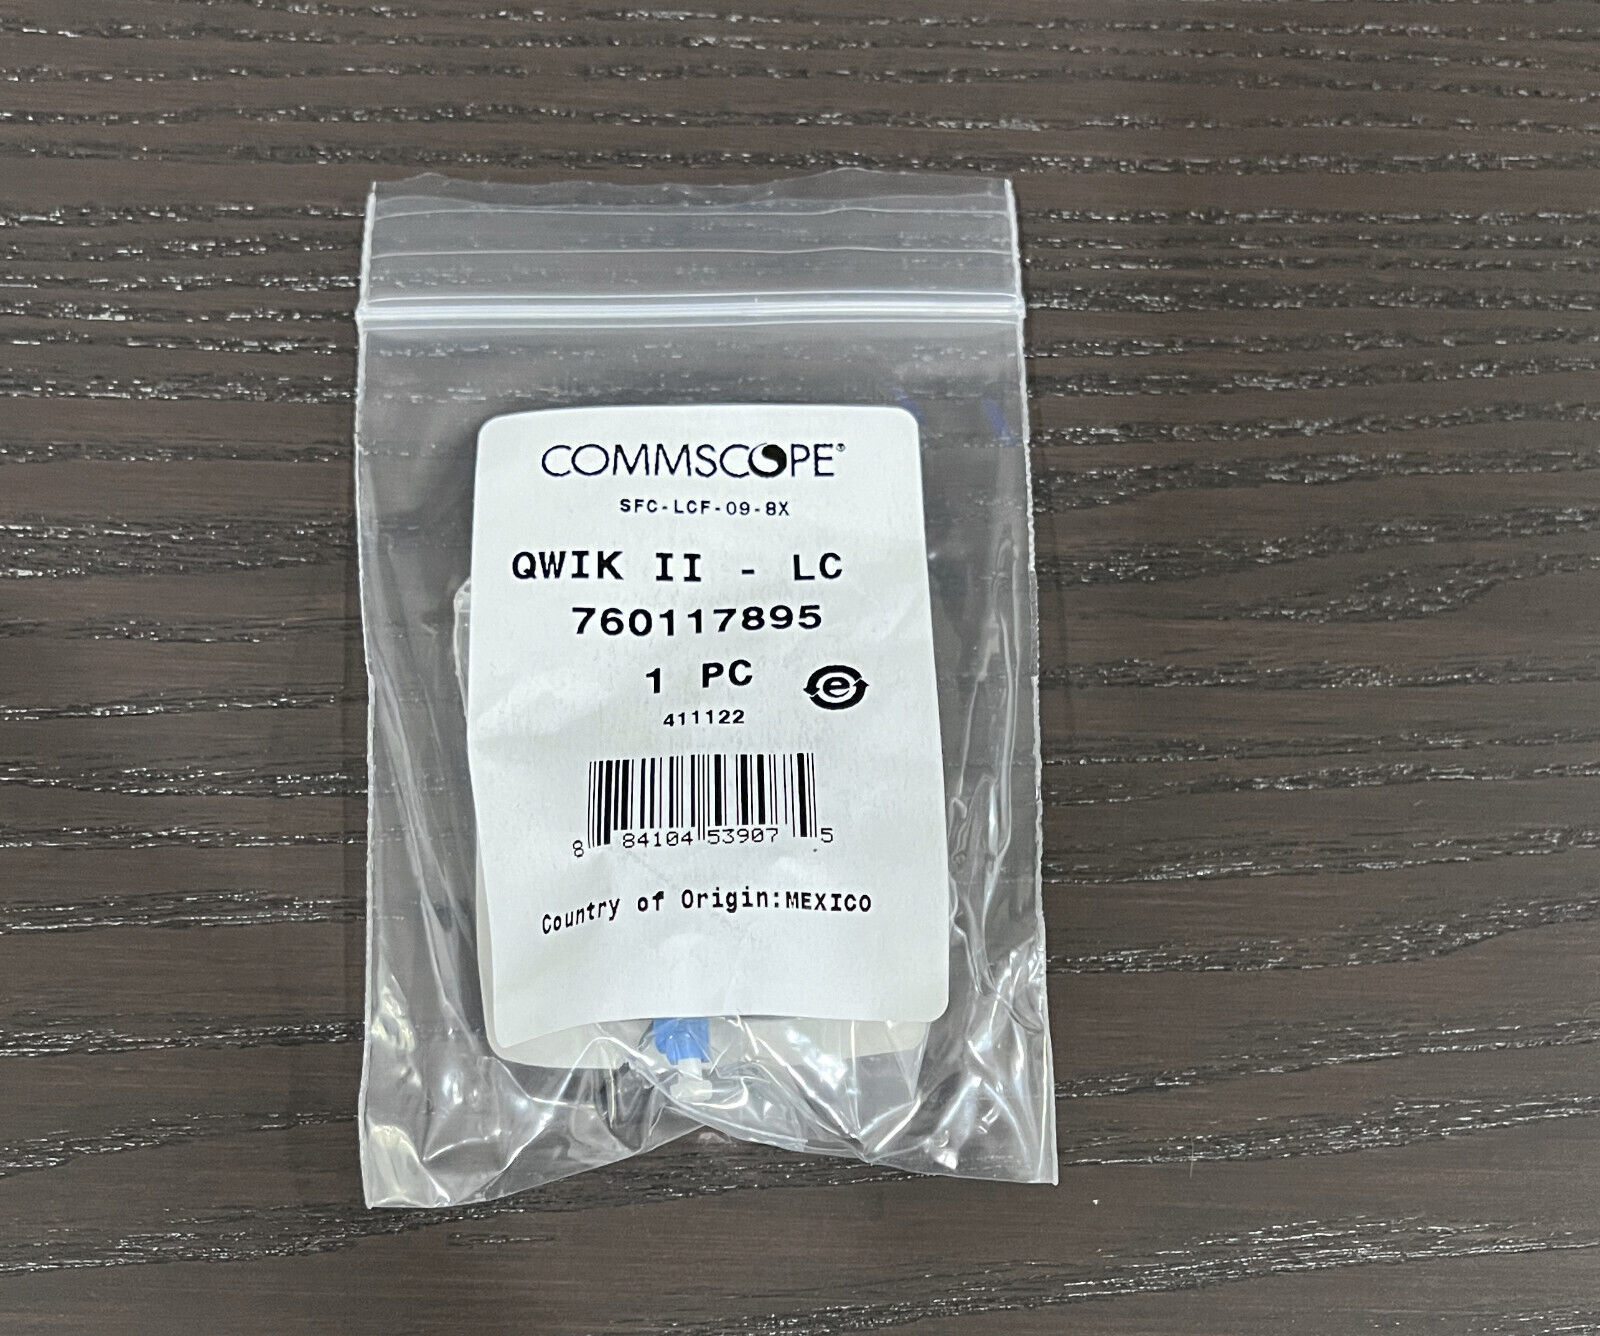 Commscope 760117895 SF-LCF-09-8X LazrSPEED Qwik II-LC Connector (OS2) BRAND NEW